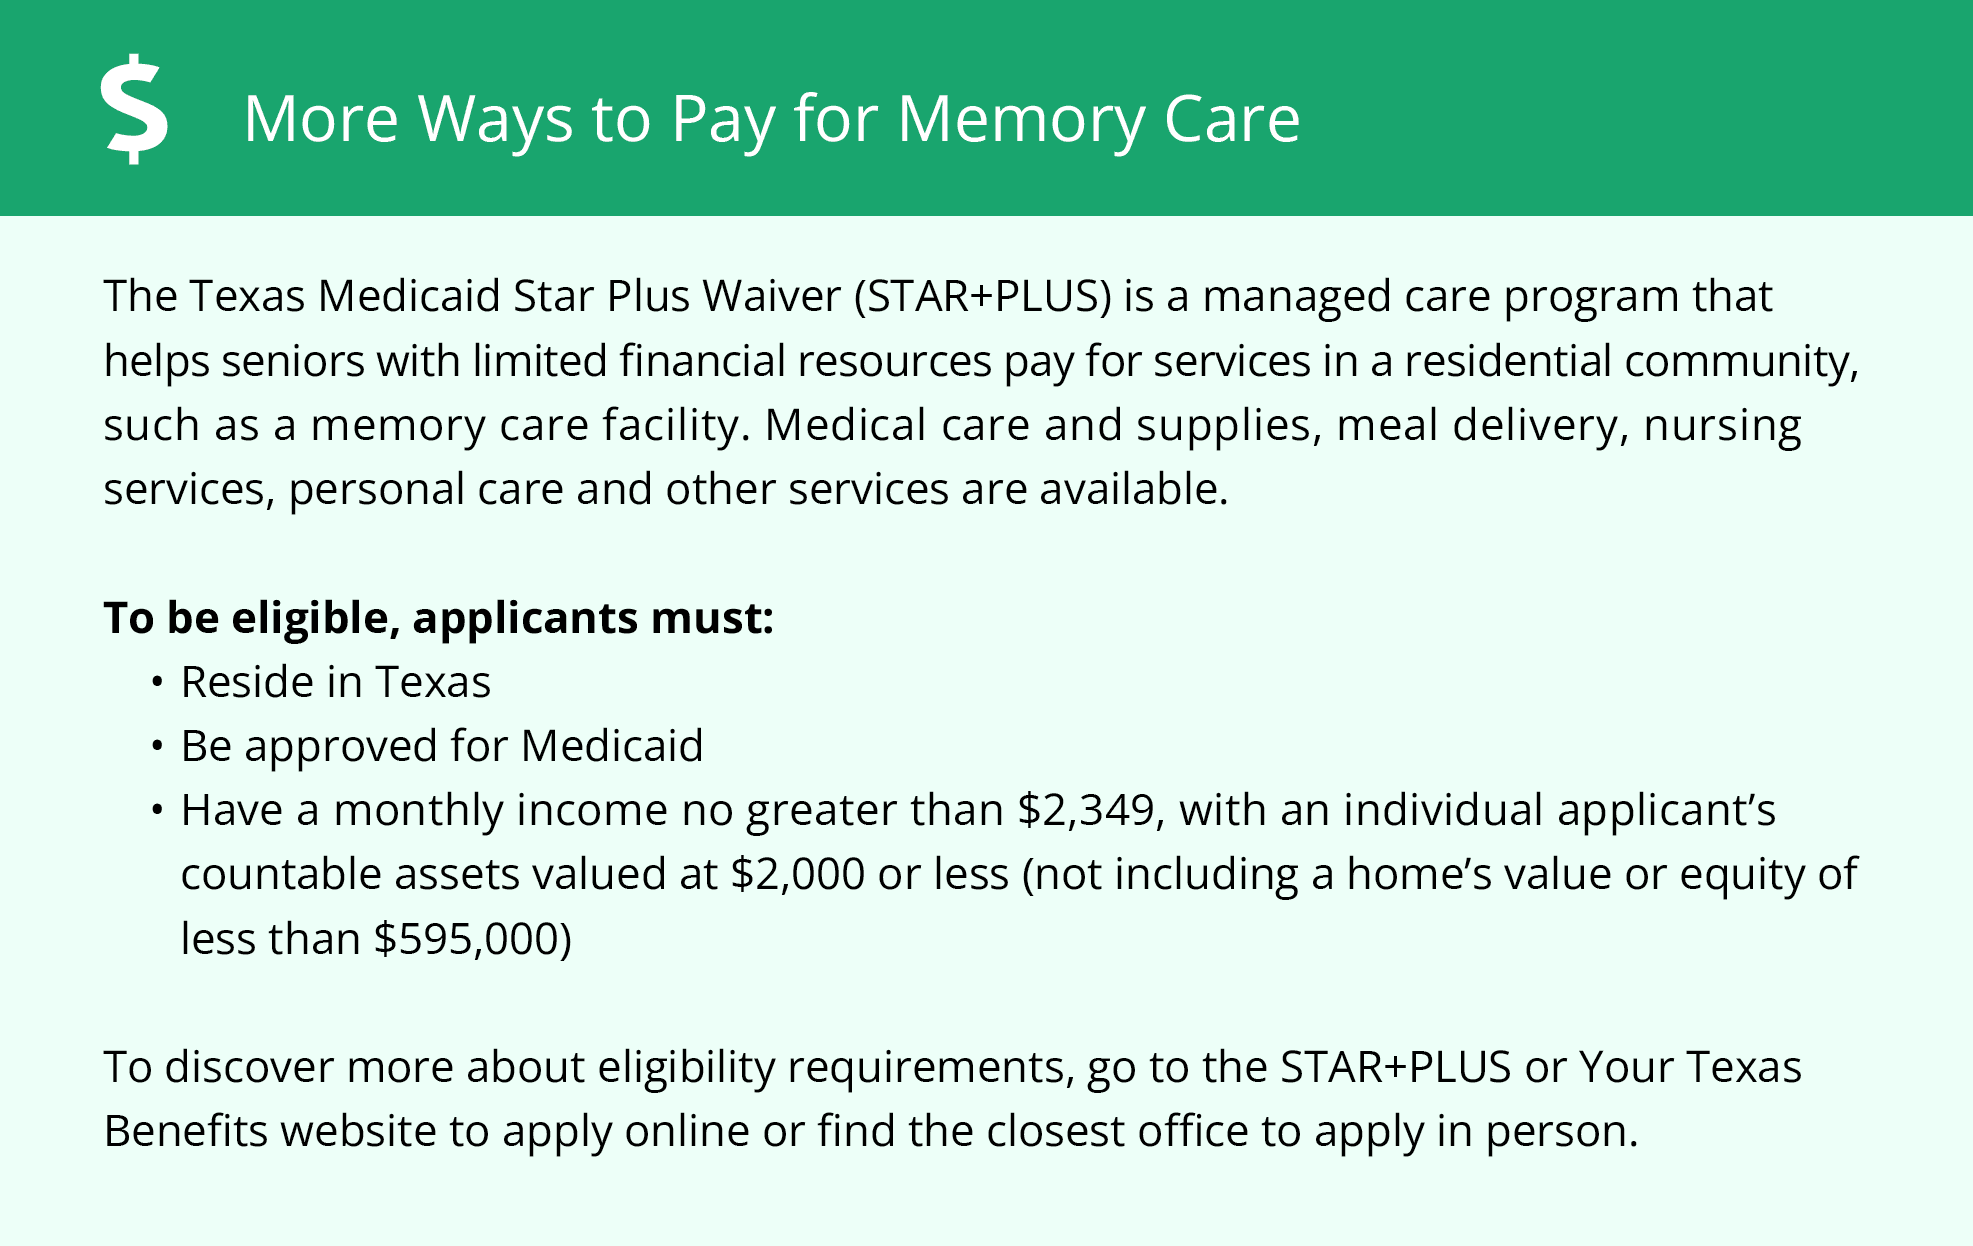 More ways to pay for memory care in Texas